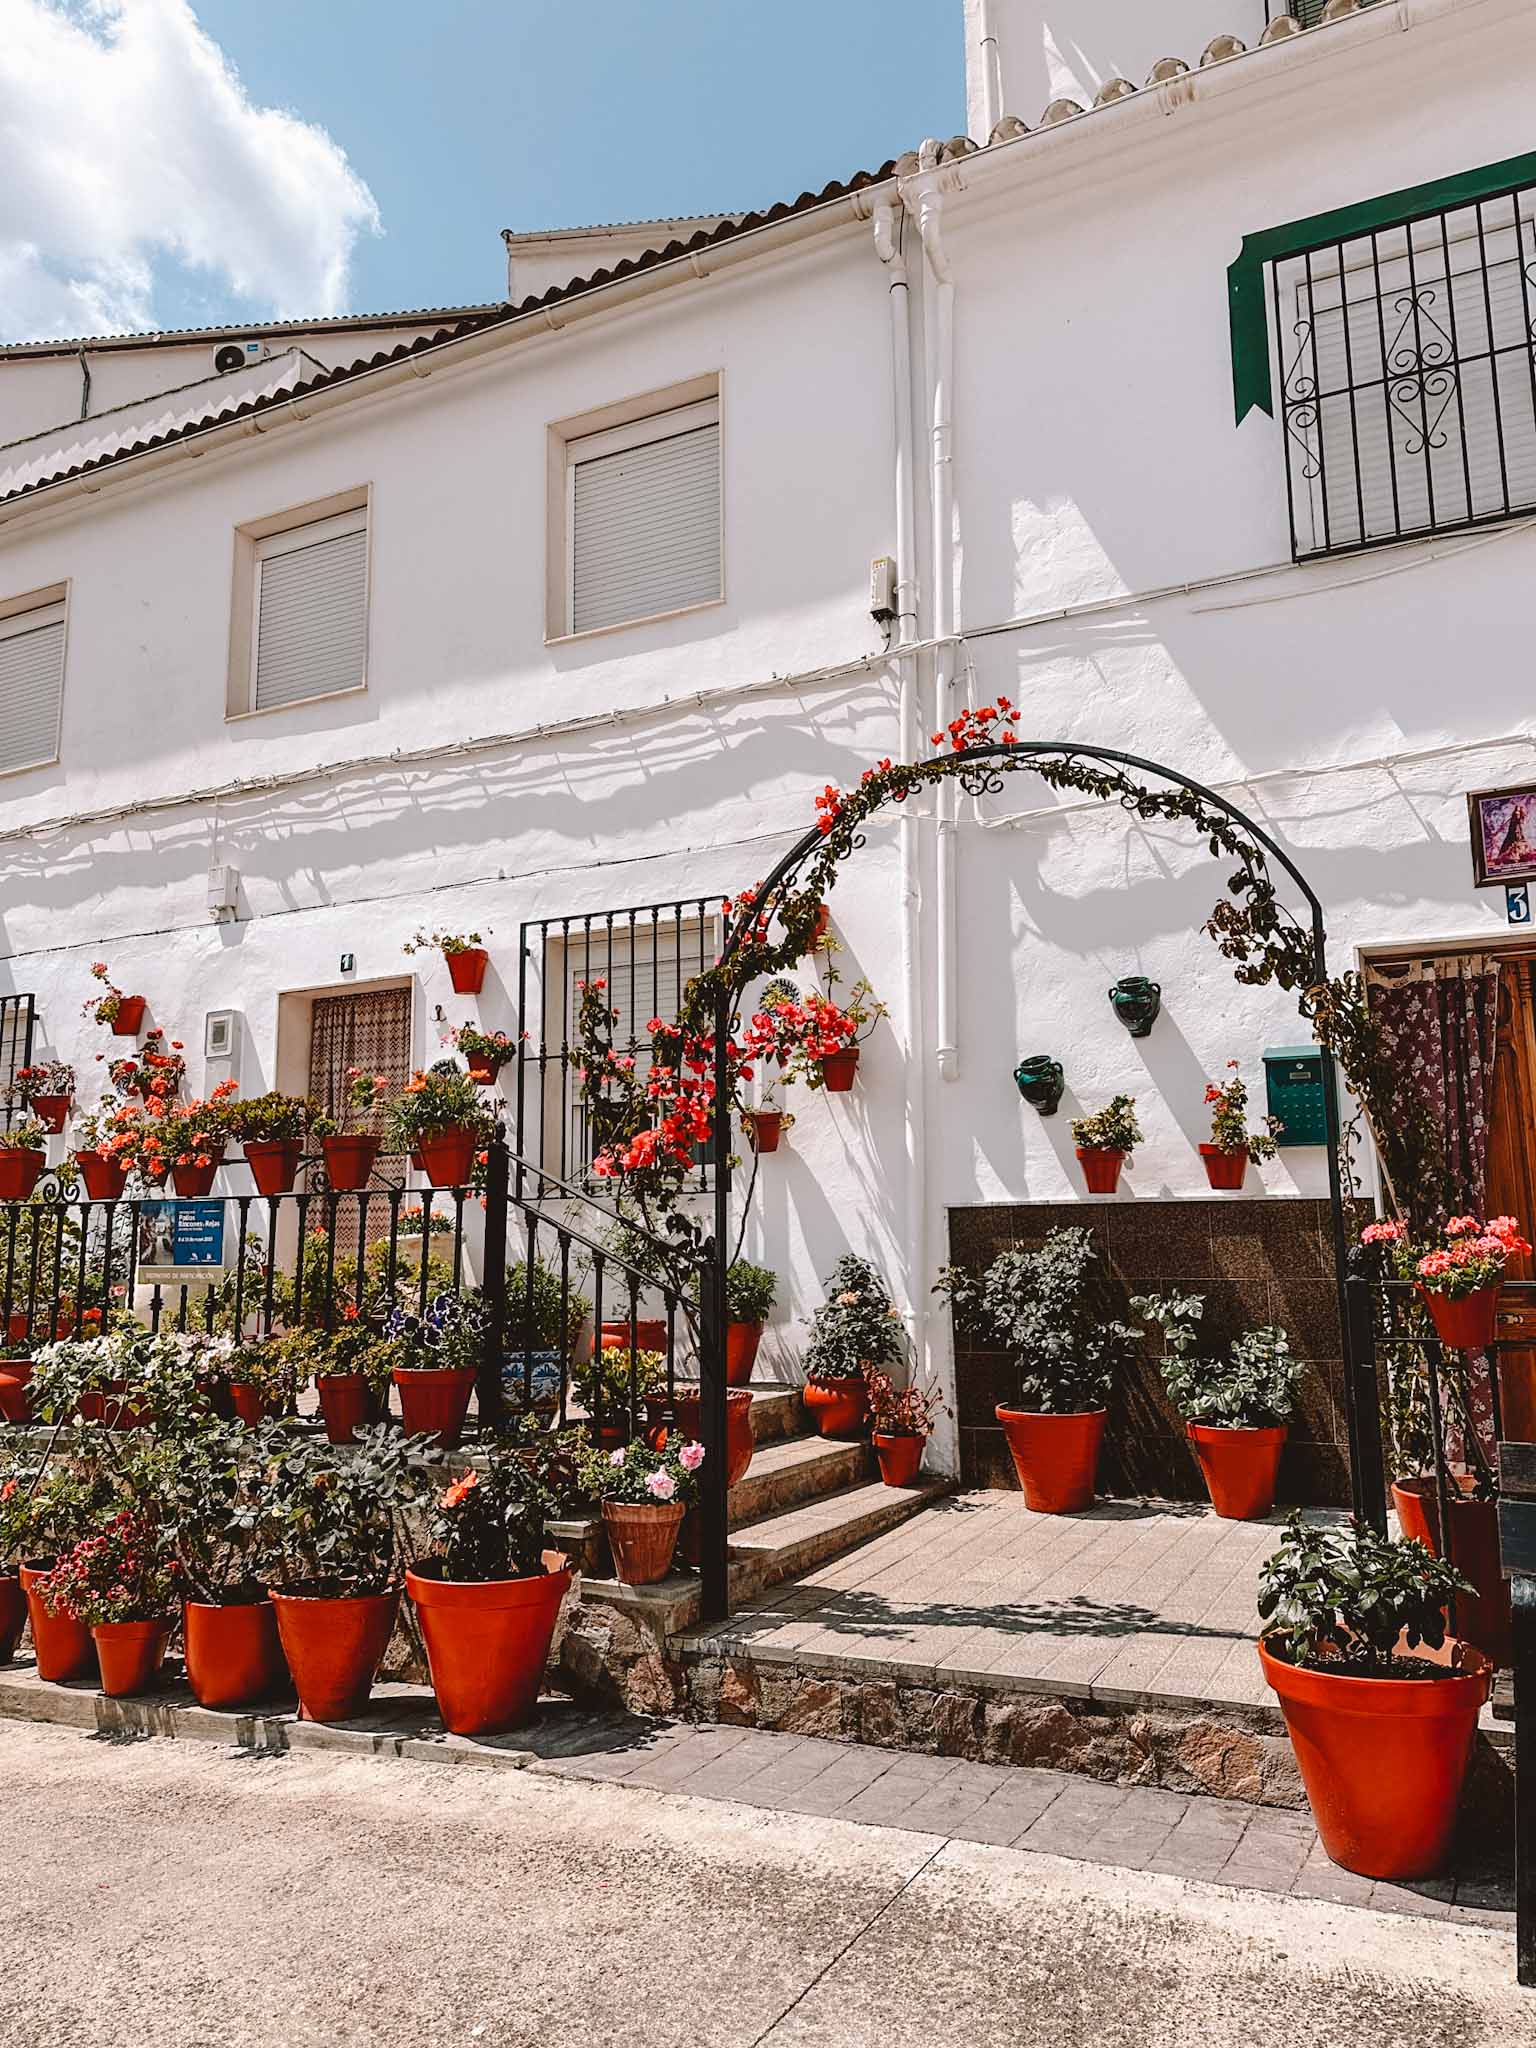 Iznajar village, Cordoba - things to do in the hidden flower village in the mountains of Andalusia